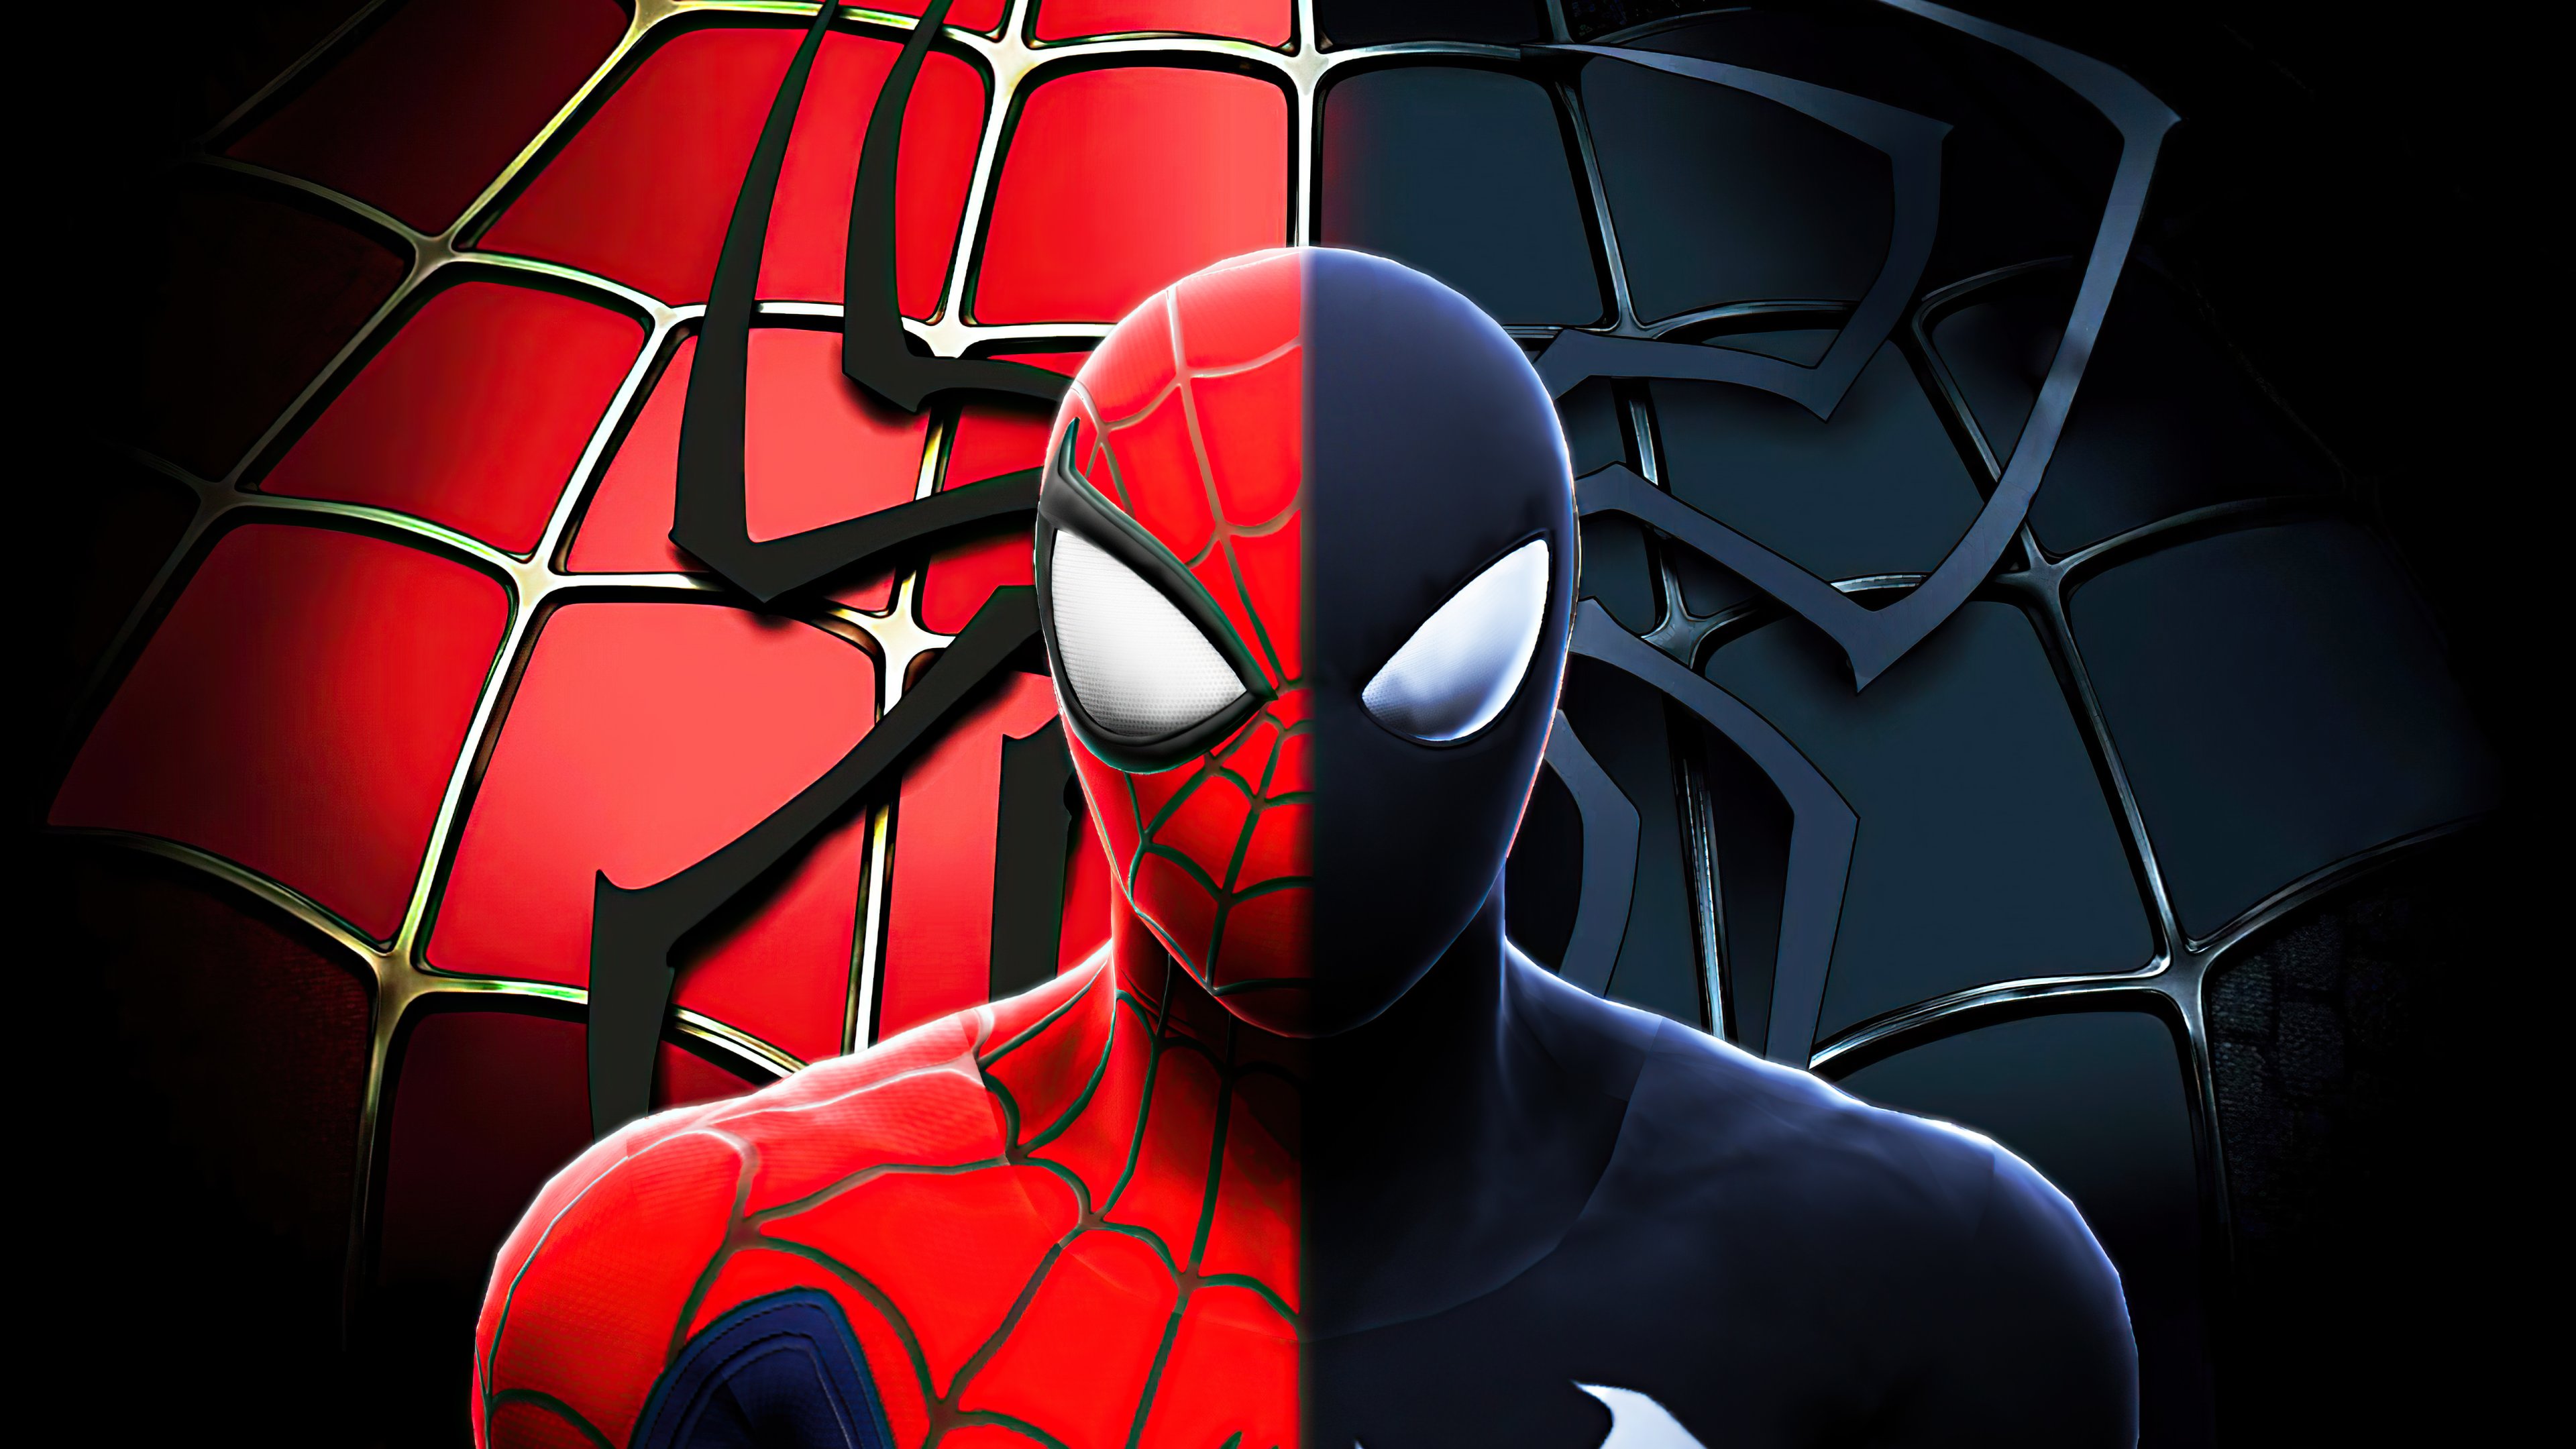 Spider Man Classic and Symbiote Wallpaper 5k Ultra HD ID:10041